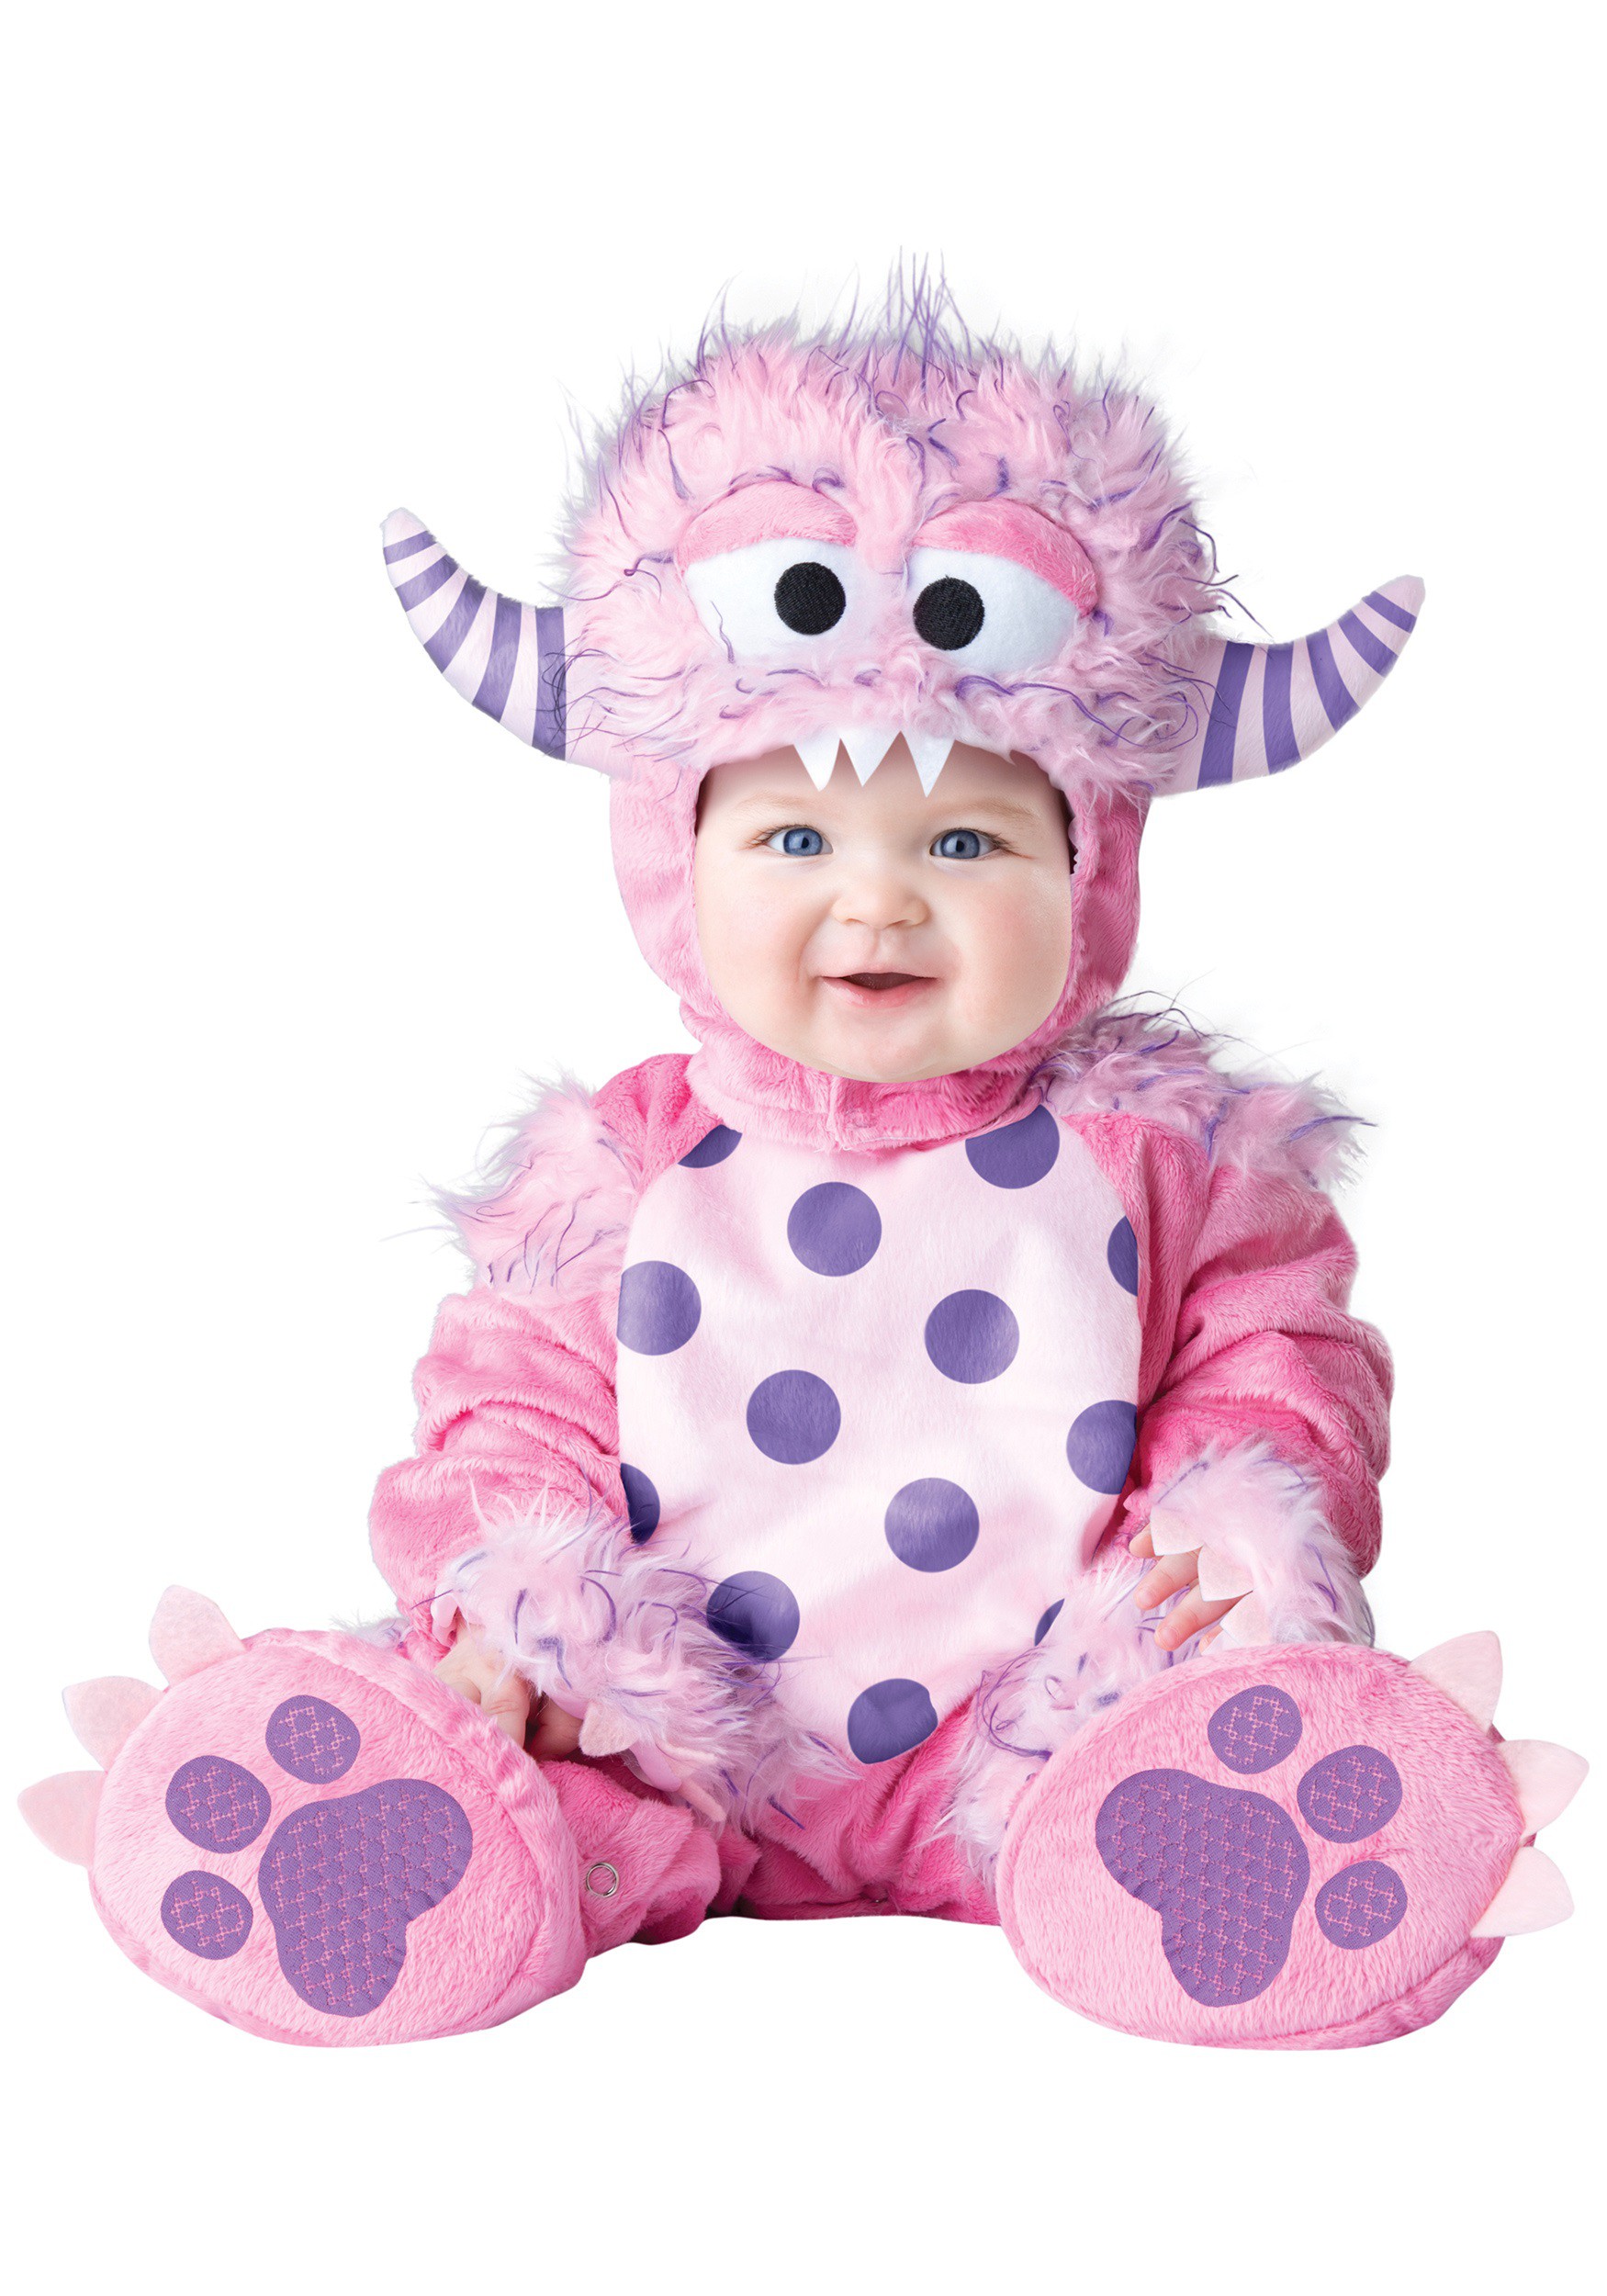 Image of Infant/Toddler Lil Pink Monster Costume ID IN6068-L